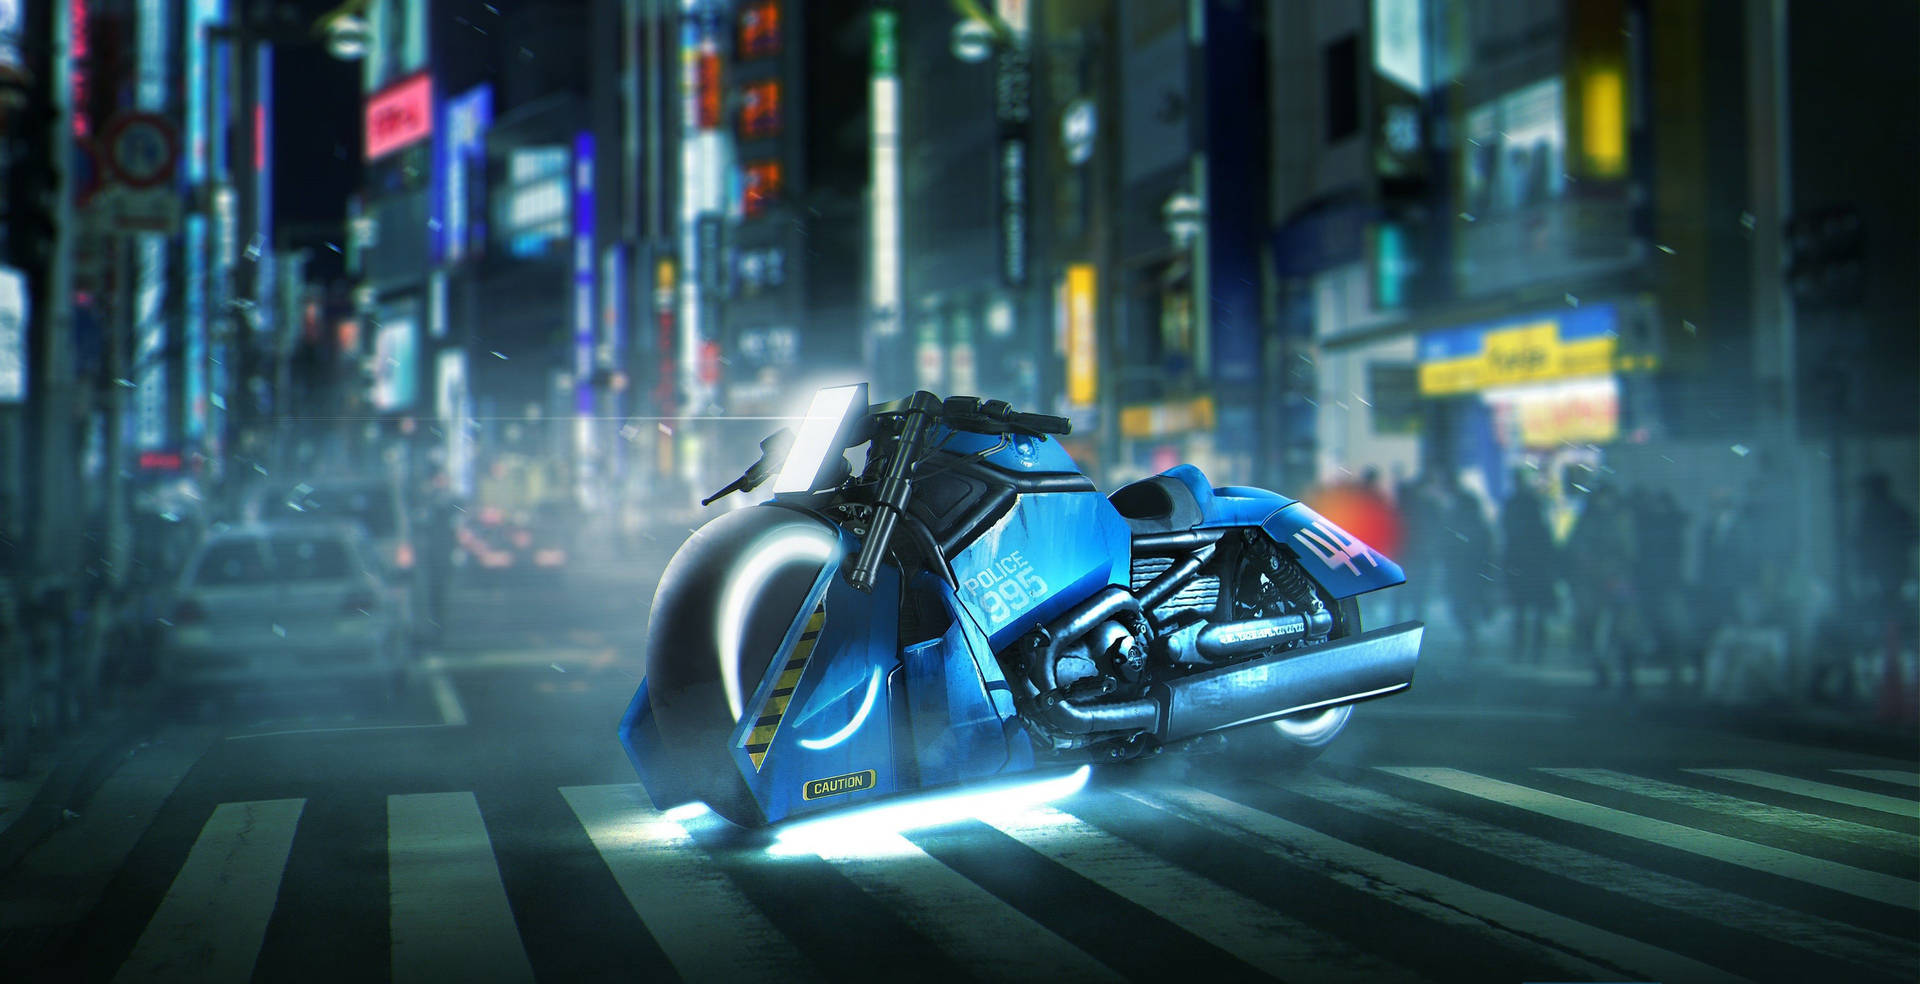 A Futuristic Harley Davidson Motorcycle on the streets of the dystopian Blade Runner Wallpaper